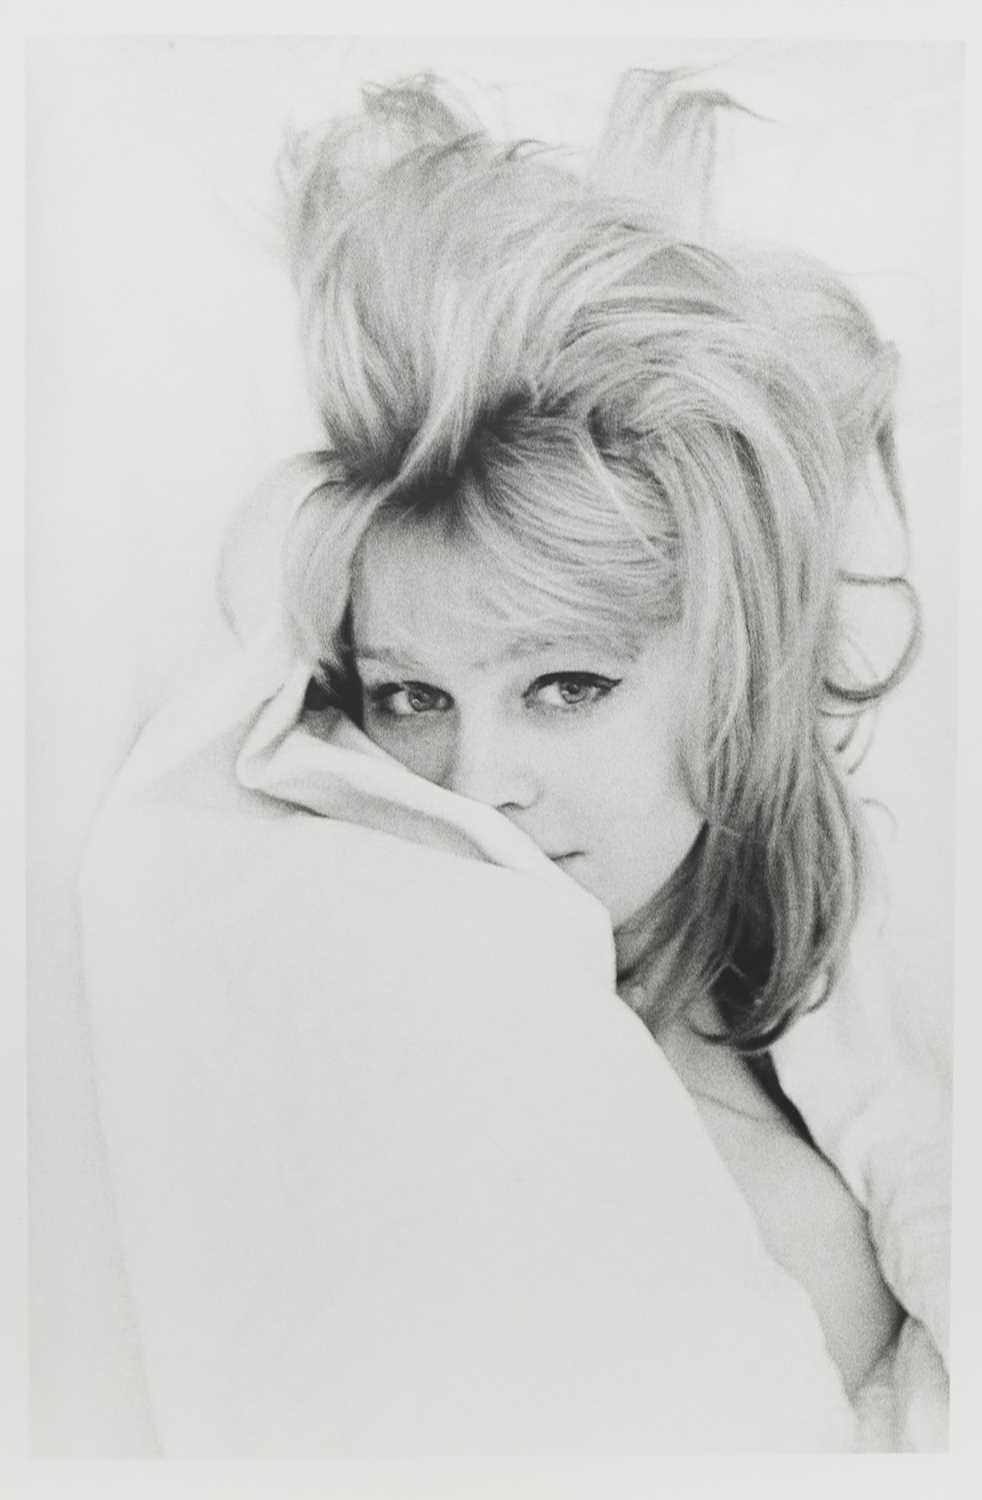 Lot 73 - JULIE CHRISTIE I, A PHOTOGRAPH BY TERENCE DONOVAN